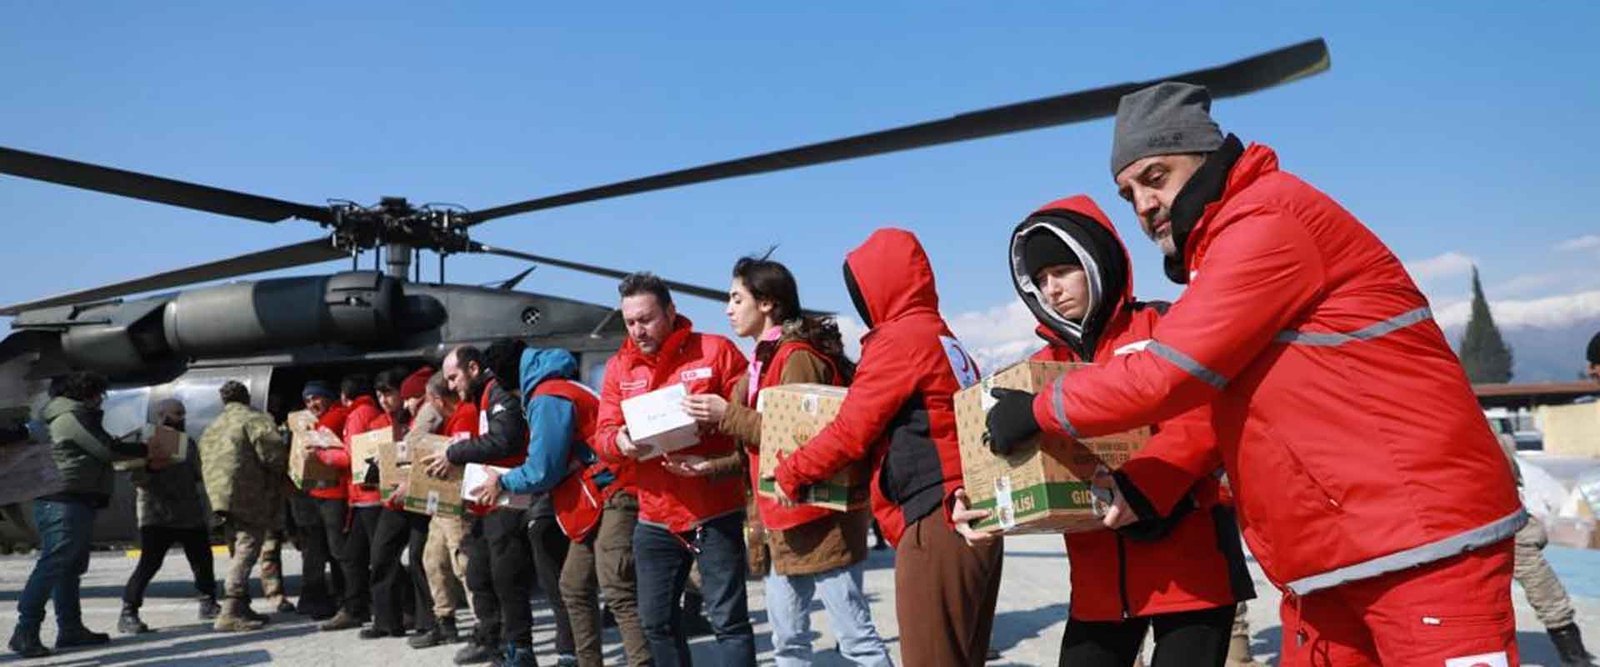 The Turkish Red Crescent Has Delivered Emergency Aid To 900 Villages Affected By The Earthquake (1)